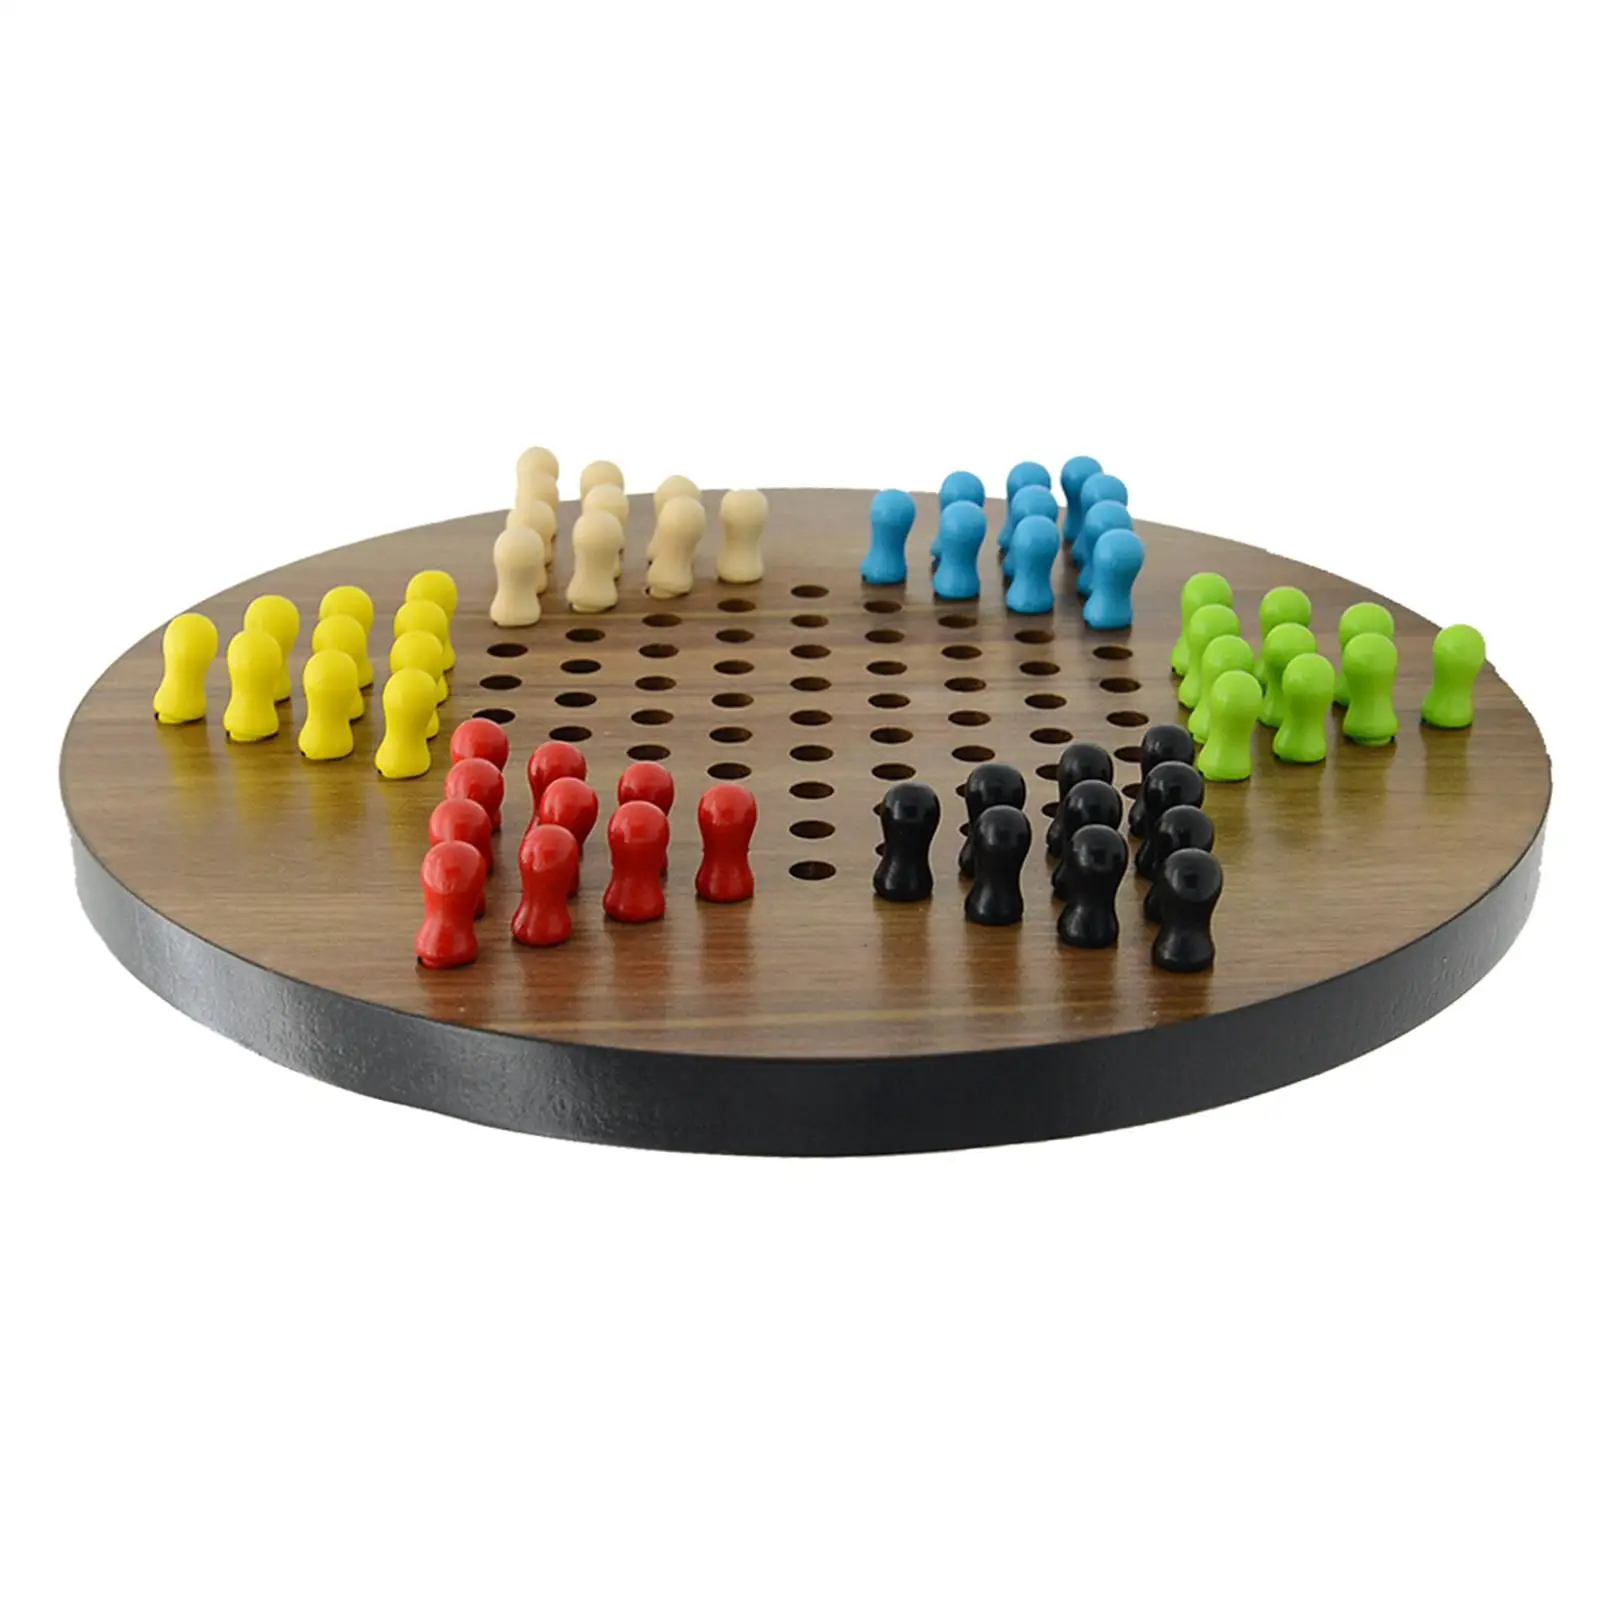 Chinese Checkers Game Classic Strategy Chinese Checkers Game Set Includes 60 Colorful Chinese Checkers with Marbles for Toddler